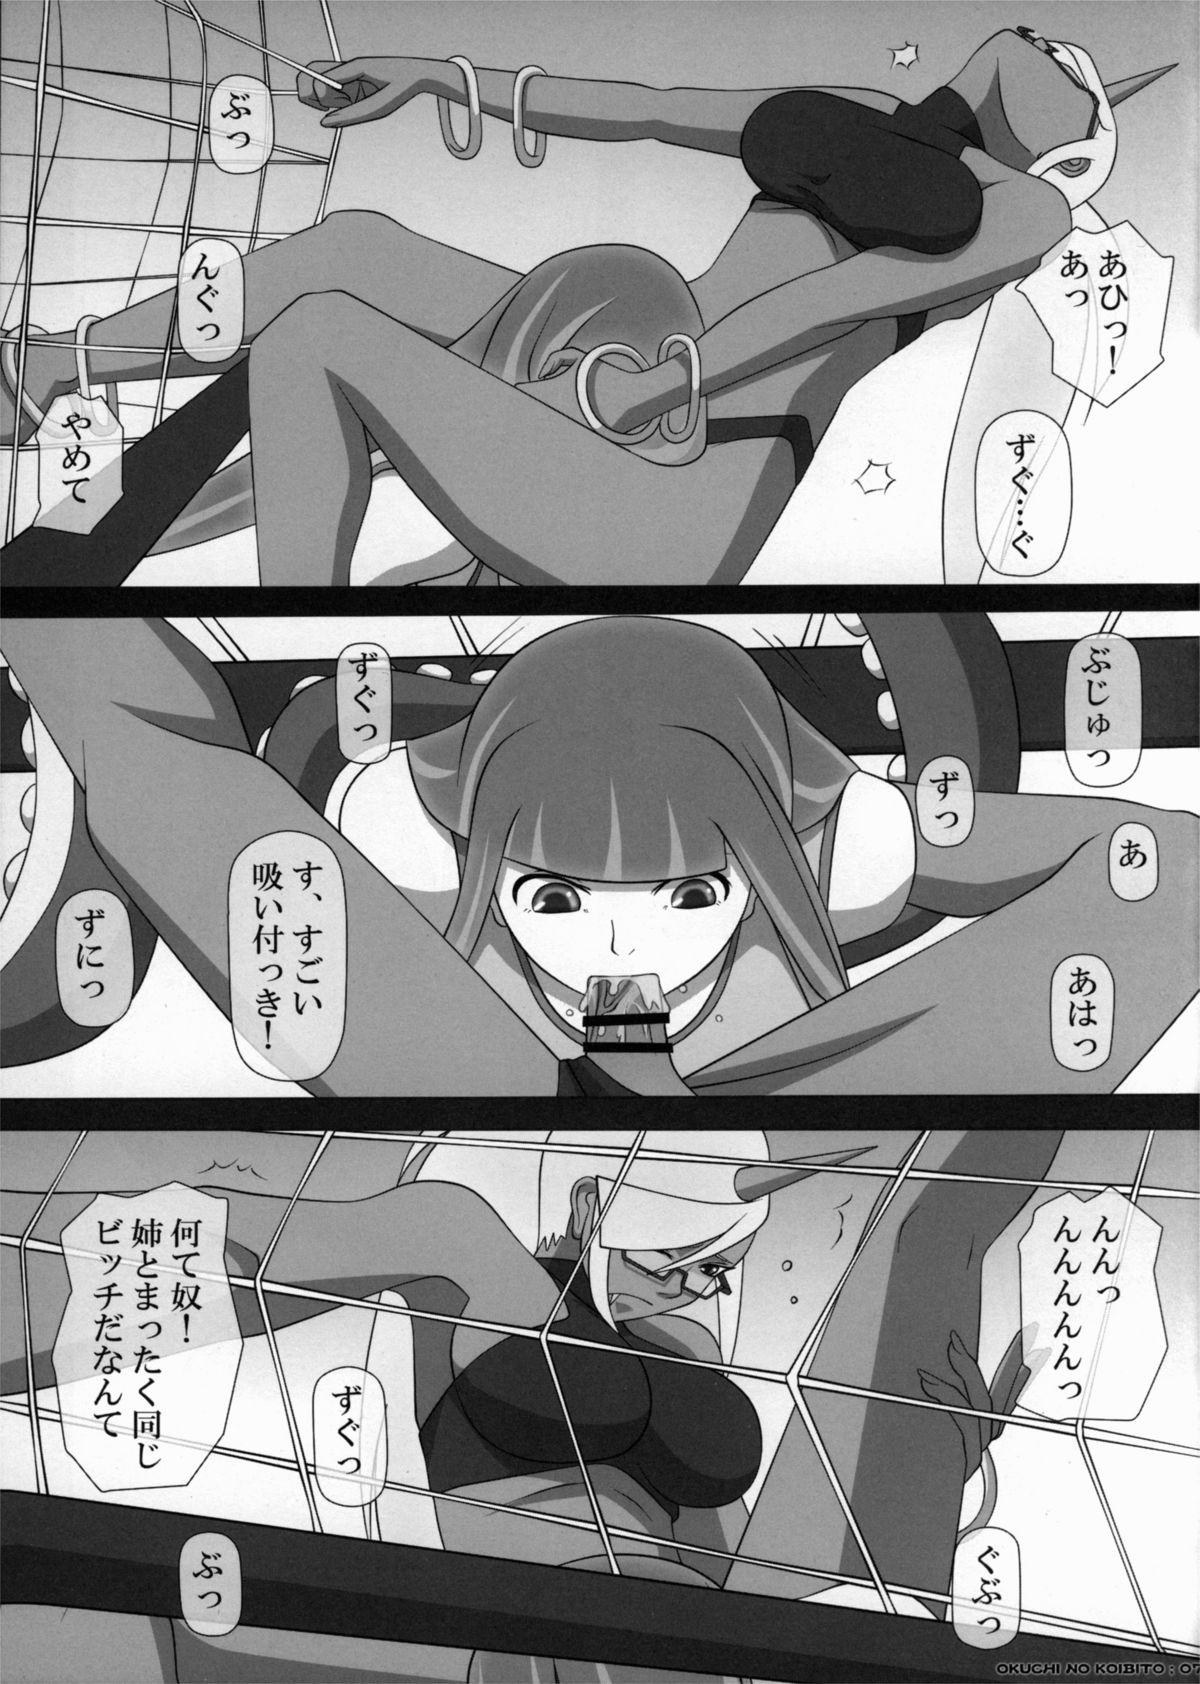 Oral Sex SWEET HOLE - Panty and stocking with garterbelt Anal Porn - Page 7